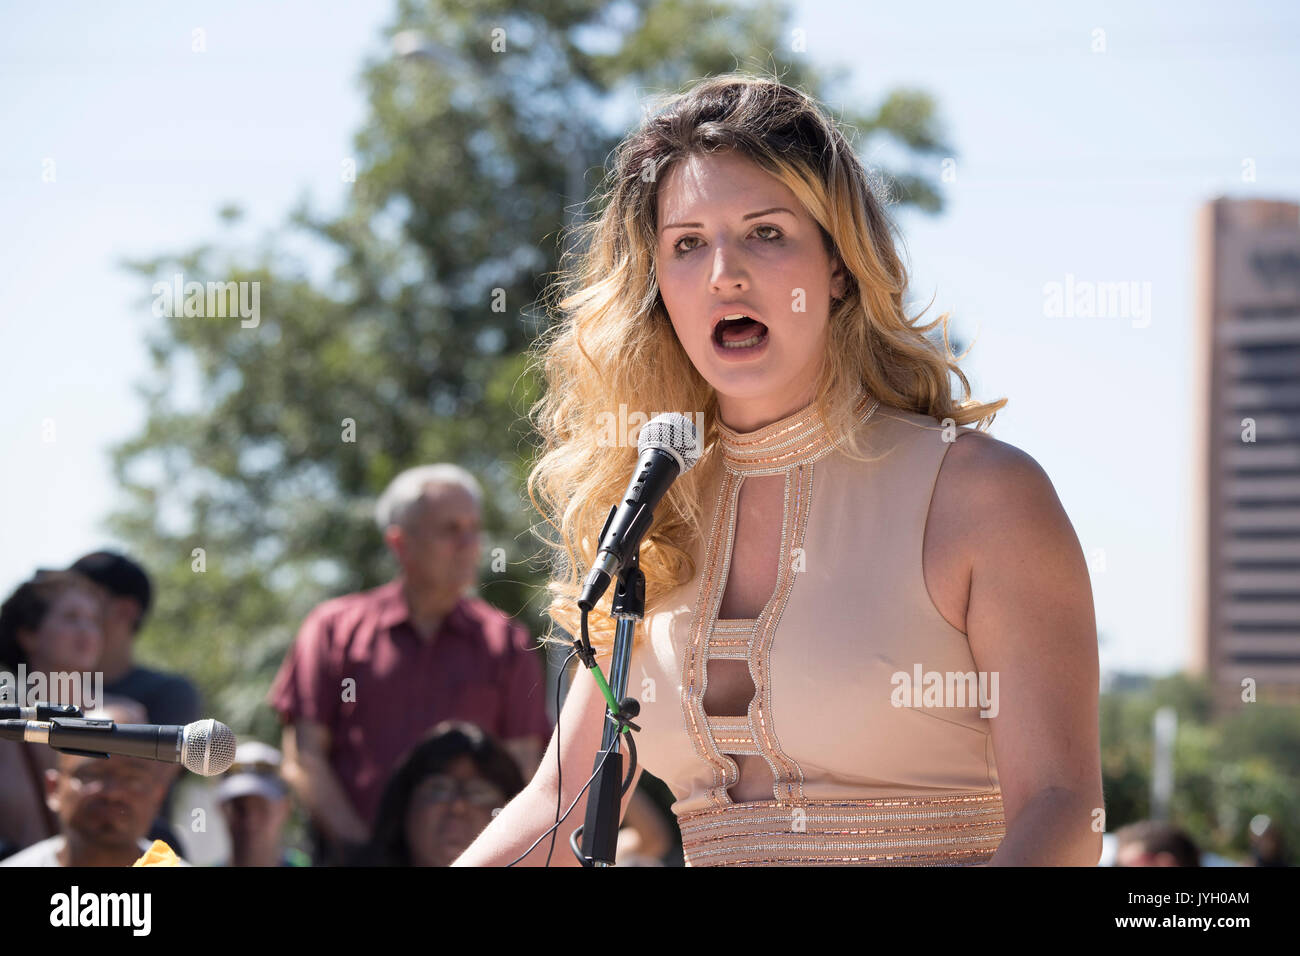 Transgender spokesperson Chrissie Foxx Paris speaks as activists and protesters converge on City Hall for a hot two-hour rally against racism and President Donald Trump's apparent insensitive comments about recent Charlottesville violence that left one dead. About 1,000 gathered in the August Texas heat. Stock Photo